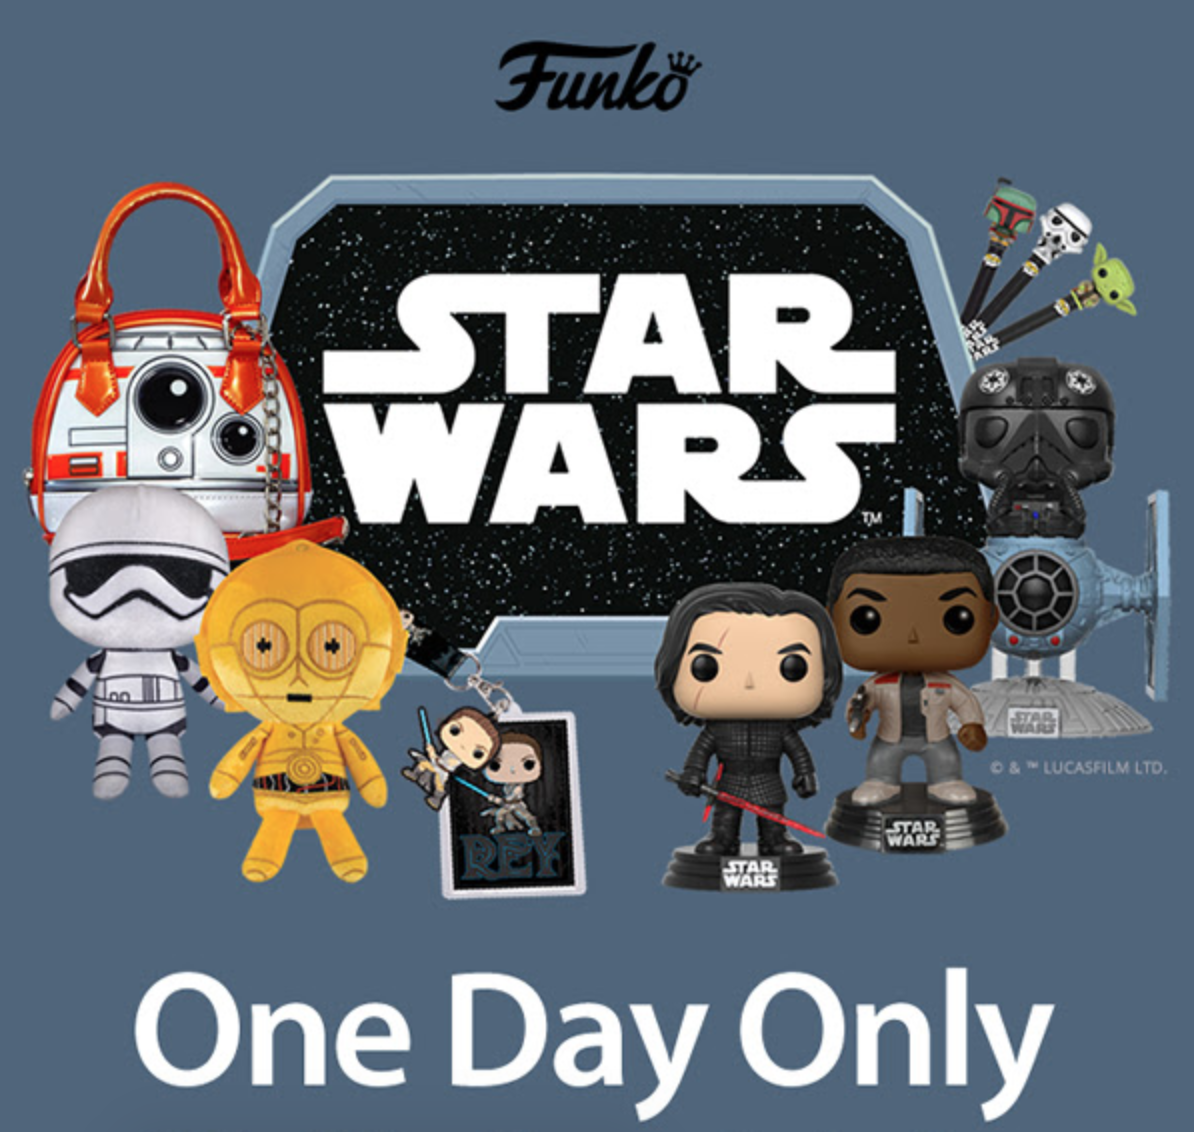 Today Only! Smuggler’s Bounty Coupon – 15% Off The Last Jedi Box!